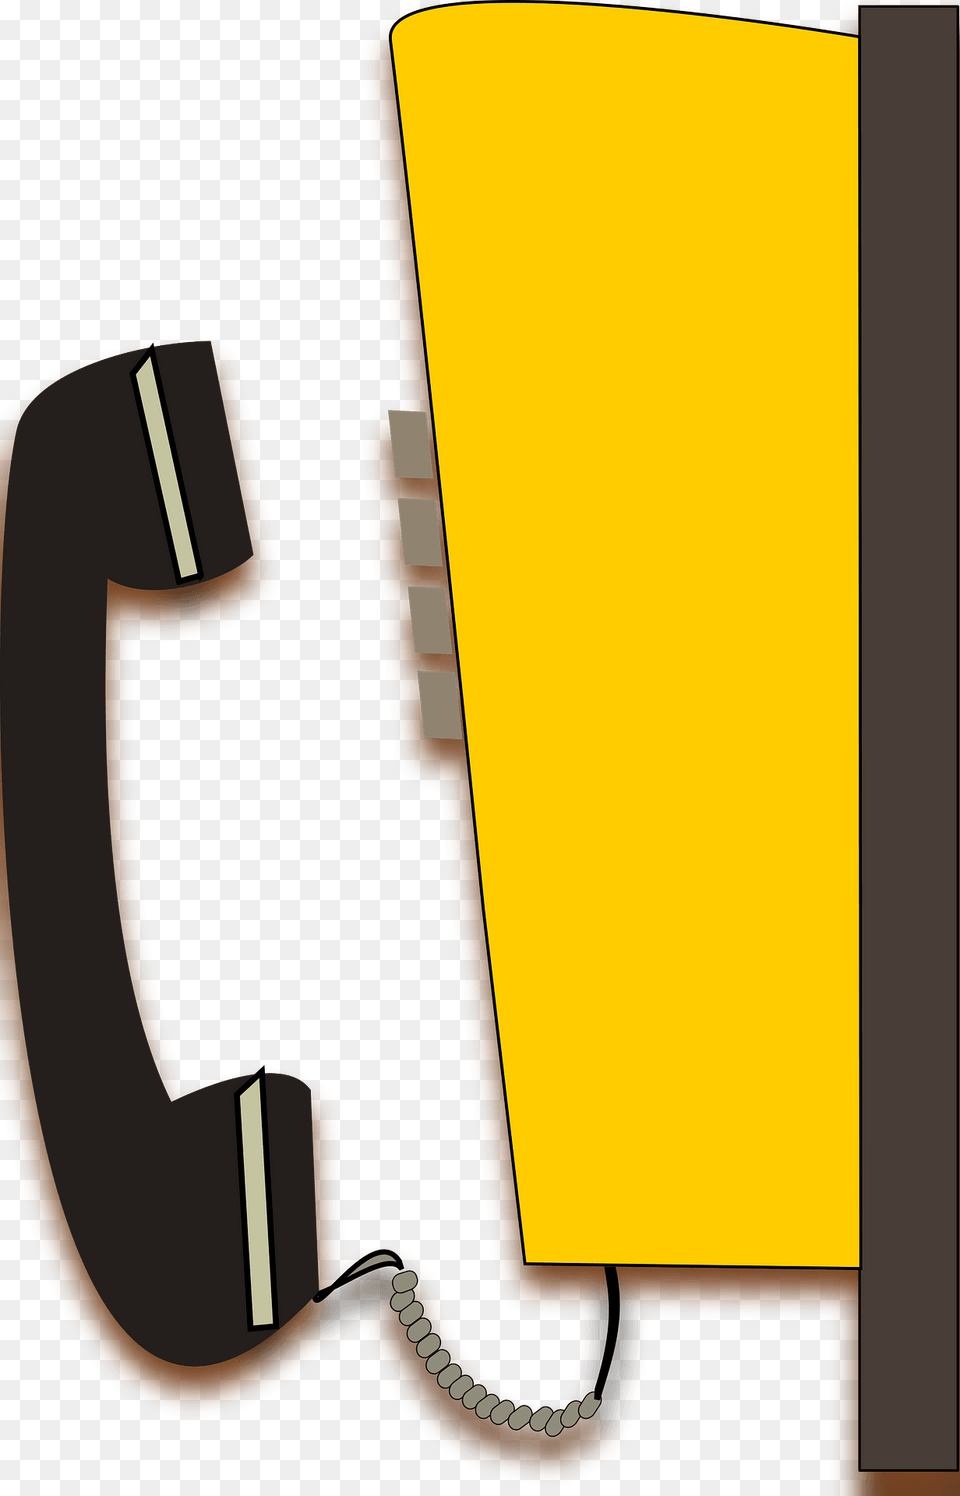 Public Telephone Clipart, Electronics, Phone, Mobile Phone Png